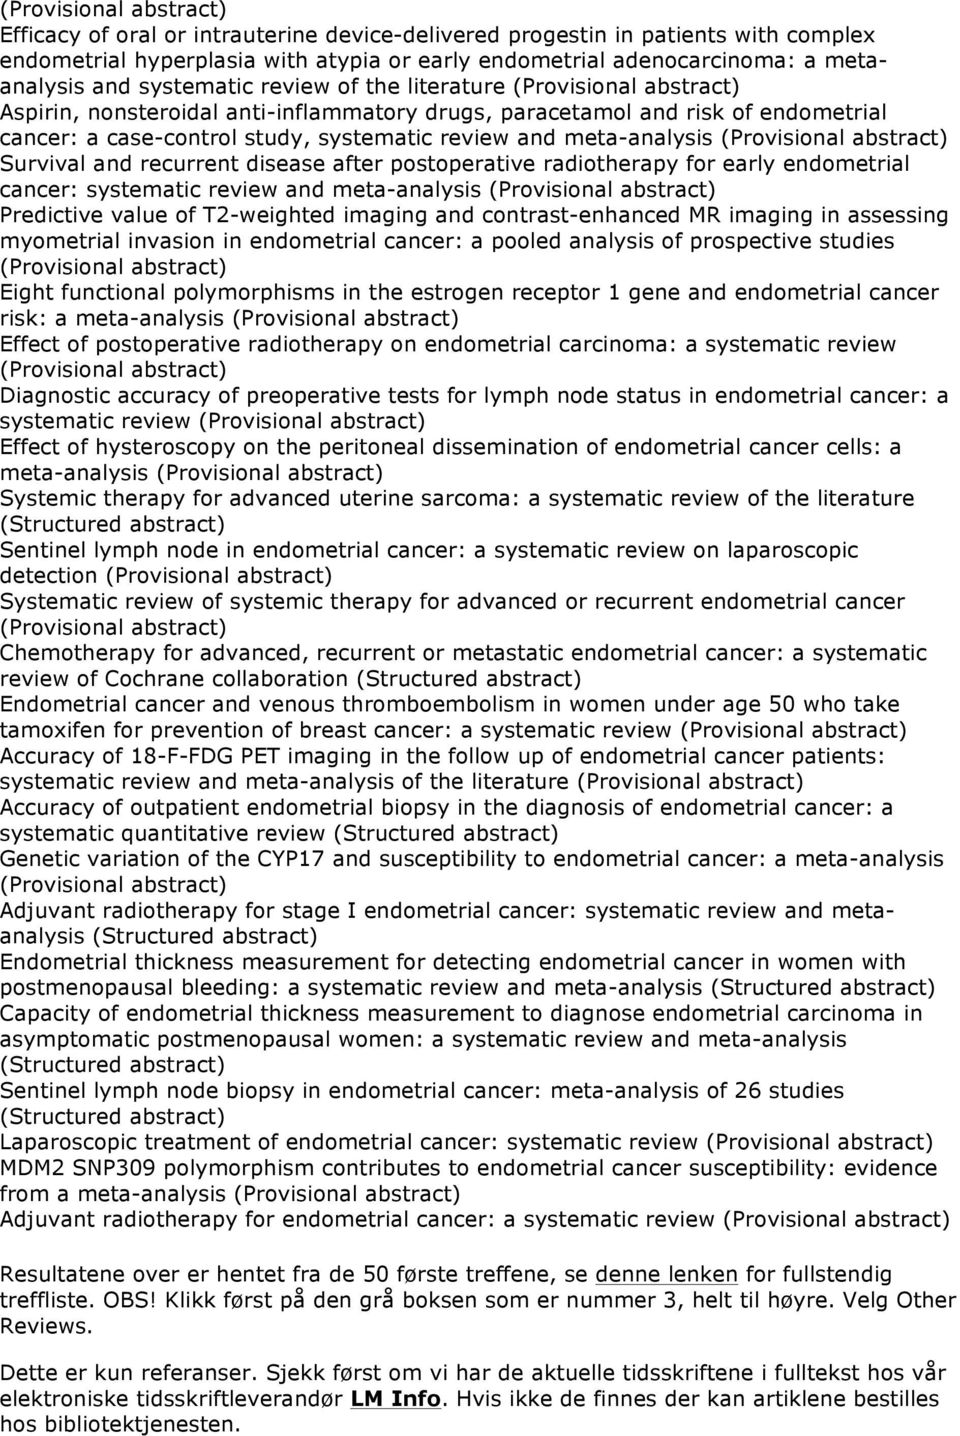 meta-analysis (Provisional abstract) Survival and recurrent disease after postoperative radiotherapy for early endometrial cancer: systematic review and meta-analysis (Provisional abstract)